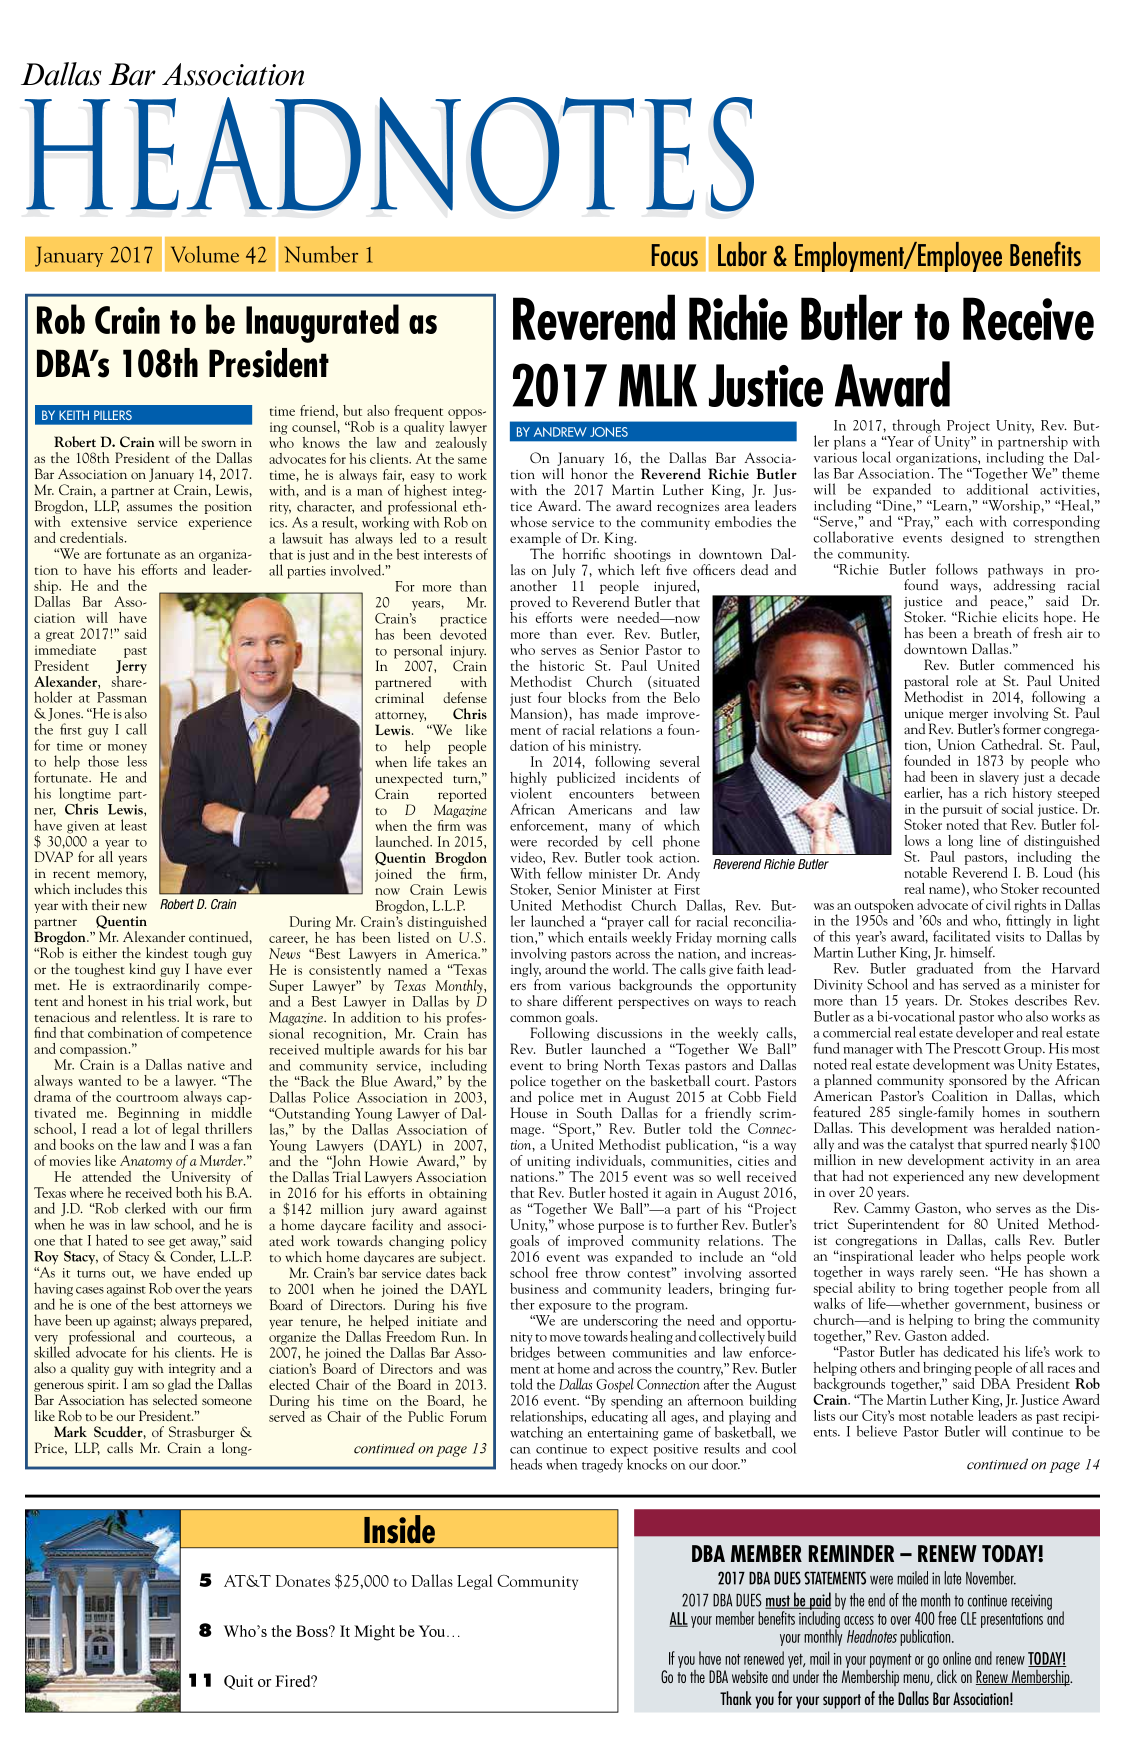 handle is hein.barjournals/hdba0042 and id is 1 raw text is: 



Dallas Bar Association


Rob Crain to be Inaugurated as

DBA's 108th President


   Robert D. Crain will be sworn in
as the 108th President of the Dallas
Bar Association on January 14, 2017.
Mr. Crain, a partner at Crain, Lewis,
Brogdon, LLP, assumes the position
with extensive service experience
and credentials.
   We are fortunate as an organiza-
tion to have his efforts and leader-
ship. He and the
Dallas Bar Asso-
ciation will have
a great 2017! said
immediate     past
President    Jerry
Alexander, share-
holder at Passman
&Jones. He is also
the first guy I call
for time or money
to help those less
fortunate. He and
his longtime part-
ner, Chris Lewis,
have given at least
$ 30,000 a year to
DVAP for all years
in recent memory,
which includes this
year with their new Robert D. Crain
partner   Quentin
Brogdon. Mr. Alexander continued,
Rob is either the kindest tough guy
or the toughest kind guy I have ever
met. He is extraordinarily compe-
tent and honest in his trial work, but
tenacious and relentless. It is rare to
find that combination of competence
and compassion.
   Mr. Crain is a Dallas native and
always wanted to be a lawyer. The
drama of the courtroom always cap-
tivated me. Beginning in middle
school, I read a lot of legal thrillers
and books on the law and I was a fan
of movies like Anatomy of a Murder.
   He attended the University of
Texas where he received both his B.A.
and J.D. Rob clerked with our firm
when he was in law school, and he is
one that I hated to see get away, said
Roy Stacy, of Stacy & Conder, L.L.P.
As it turns out, we have ended up
having cases against Rob over the years
and he is one of the best attorneys we
have been up against; always prepared,
very professional and courteous, a
skilled advocate for his clients. He is
also a quality guy with integrity and a
generous spirit. I am so glad the Dallas
Bar Association has selected someone
like Rob to be our President.
   Mark Scudder, of Strasburger &
Price, LLP, calls Mr. Crain a long-


time friend, but also frequent oppos-
ing counsel, Rob is a quality lawyer
who knows the law and zealously
advocates for his clients. At the same
time, he is always fair, easy to work
with, and is a man of highest integ-
rity, character, and professional eth-
ics. As a result, working with Rob on
a lawsuit has always led to a result
that is just and in the best interests of
all parties involved.
                    For more than
                 20    years,  Mr.
                 Crain's   practice
                 has been devoted
                 to personal injury.
                 In   2007, Crain
                 partnered    with
                 criminal   defense
                 attorney,   Chris
                 Lewis. We    like
                 to  help   people
                 when life takes an
                 unexpected turn,
                 Crain     reported
                 to  D    Magazine
                 when the firm was
                 launched. In 2015,
                 Quentin Brogdon
                 joined  the firm,
                 now Crain Lewis
                 Brogdon, L.L.P.
   During Mr. Crain's distinguished
career, he has been listed on U.S.
News Best Lawyers in America.
He is consistently named a Texas
Super Lawyer by Texas Monthly,
and a Best Lawyer in Dallas by D
Magazine. In addition to his profes-
sional recognition, Mr. Crain has
received multiple awards for his bar
and community service, including
the Back the Blue Award, by the
Dallas Police Association in 2003,
Outstanding Young Lawyer of Dal-
las, by the Dallas Association of
Young Lawyers (DAYL) in 2007,
and the John Howie Award, by
the Dallas Trial Lawyers Association
in 2016 for his efforts in obtaining
a $142 million jury award against
a home daycare facility and associ-
ated work towards changing policy
to which home daycares are subject.
   Mr. Crain's bar service dates back
to 2001 when he joined the DAYL
Board of Directors. During his five
year tenure, he helped initiate and
organize the Dallas Freedom Run. In
2007, he joined the Dallas Bar Asso-
ciation's Board of Directors and was
elected Chair of the Board in 2013.
During his time on the Board, he
served as Chair of the Public Forum

             continued on page 13


Reverend Richie Butler to Receive



2017 MLK Justice Award


   On January 16, the Dallas Bar Associa-
tion will honor the Reverend Richie Butler
with the 2017 Martin Luther King, Jr. Jus-
tice Award. The award recognizes area leaders
whose service to the community embodies the
example of Dr. King.
   The horrific shootings in downtown Dal-
las on July 7, which left five officers dead and
another   11  people injured,
proved to Reverend Butler that
his efforts were needed-now
more than ever. Rev. Butler,
who serves as Senior Pastor to
the historic St. Paul United
Methodist Church      (situated
just four blocks from the Belo
Mansion), has made improve-
ment of racial relations a foun-
dation of his ministry.
   In 2014, following several
highly publicized incidents of
violent  encounters   between
African  Americans and     law
enforcement, many of which
were recorded by cell phone
video, Rev. Butler took action. Reverend Richie
With fellow minister Dr. Andy
Stoker, Senior Minister at First
United Methodist Church Dallas, Rev. But-
ler launched a prayer call for racial reconcilia-
tion, which entails weekly Friday morning calls
involving pastors across the nation, and increas-
ingly, around the world. The calls give faith lead-
ers from various backgrounds the opportunity
to share different perspectives on ways to reach
common goals.
   Following discussions in the weekly calls,
Rev. Butler launched a Together We Ball
event to bring North Texas pastors and Dallas
police together on the basketball court. Pastors
and police met in August 2015 at Cobb Field
House in South Dallas for a friendly scrim-
mage. Sport, Rev. Butler told the Connec-
tion, a United Methodist publication, is a way
of uniting individuals, communities, cities and
nations. The 2015 event was so well received
that Rev. Butler hosted it again in August 2016,
as Together We Ball-a part of his Project
Unity, whose purpose is to further Rev. Butler's
goals of improved community relations. The
2016 event was expanded to include an old
school free throw contest involving assorted
business and community leaders, bringing fur-
ther exposure to the program.
   We are underscoring the need and opportu-
nity to move towards healing and collectively build
bridges between communities and law enforce-
ment at home and across the country, Rev. Butler
told the Dallas Gospel Connection after the August
2016 event. By spending an afternoon building
relationships, educating all ages, and playing and
watching an entertaining game of basketball, we
can continue to expect positive results and cool
heads when tragedy knocks on our door.


But


   In 2017, through Project Unity, Rev. But-
ler plans a Year of Unity in partnership with
various local organizations, including the Dal-
las Bar Association. The Together We theme
will be expanded to additional activities,
including Dine, Learn, Worship, Heal,
Serve, and Pray, each with corresponding
collaborative events designed to strengthen
the community.
   Richie Butler follows pathways in pro-
               found ways, addressing racial
               justice and  peace, said   Dr.
               Stoker. Richie elicits hope. He
               has been a breath of fresh air to
               downtown Dallas.
                  Rev. Butler commenced his
               pastoral role at St. Paul United
               Methodist in 2014, following a
               unique merger involving St. Paul
               and Rev. Butler's former congrega-
               tion, Union Cathedral. St. Paul,
               founded in 1873 by people who
               had been in slavery just a decade
               earlier, has a rich history steeped
               in the pursuit of social justice. Dr.
               Stoker noted that Rev. Butler fol-
               lows a long line of distinguished
itier          St. Paul pastors, including the
               notable Reverend I. B. Loud (his
               real name), who Stoker recounted
was an outspoken advocate of civil rights in Dallas
in the 1950s and '60s and who, fittingly in light
of this year's award, facilitated visits to Dallas by
Martin Luther King, Jr. himself.
   Rev. Butler graduated from the Harvard
Divinity School and has served as a minister for
more than 15 years. Dr. Stokes describes Rev.
Butler as a bi-vocational pastor who also works as
a commercial real estate developer and real estate
fund manager with The Prescott Group. His most
noted real estate development was Unity Estates,
a planned community sponsored by the African
American Pastor's Coalition in Dallas, which
featured 285 single-family homes in southern
Dallas. This development was heralded nation-
ally and was the catalyst that spurred nearly $100
million in new development activity in an area
that had not experienced any new development
in over 20 years.
   Rev. Cammy Gaston, who serves as the Dis-
trict Superintendent for 80 United Method-
ist congregations in Dallas, calls Rev. Butler
an inspirational leader who helps people work
together in ways rarely seen. He has shown a
special ability to bring together people from all
walks of life-whether government, business or
church-and is helping to bring the community
together, Rev. Gaston added.
   Pastor Butler has dedicated his life's work to
helping others and bringing people of all races and
backgrounds together, said DBA President Rob
Crain. The Martin Luther King, Jr. Justice Award
lists our City's most notable leaders as past recipi-
ents. I believe Pastor Butler will continue to be

                         continued on page 14


5 AT&T Donates $25,000 to Dallas Legal Community


8 Who's the Boss? It Might be You...


1 1 Quit or Fired?


